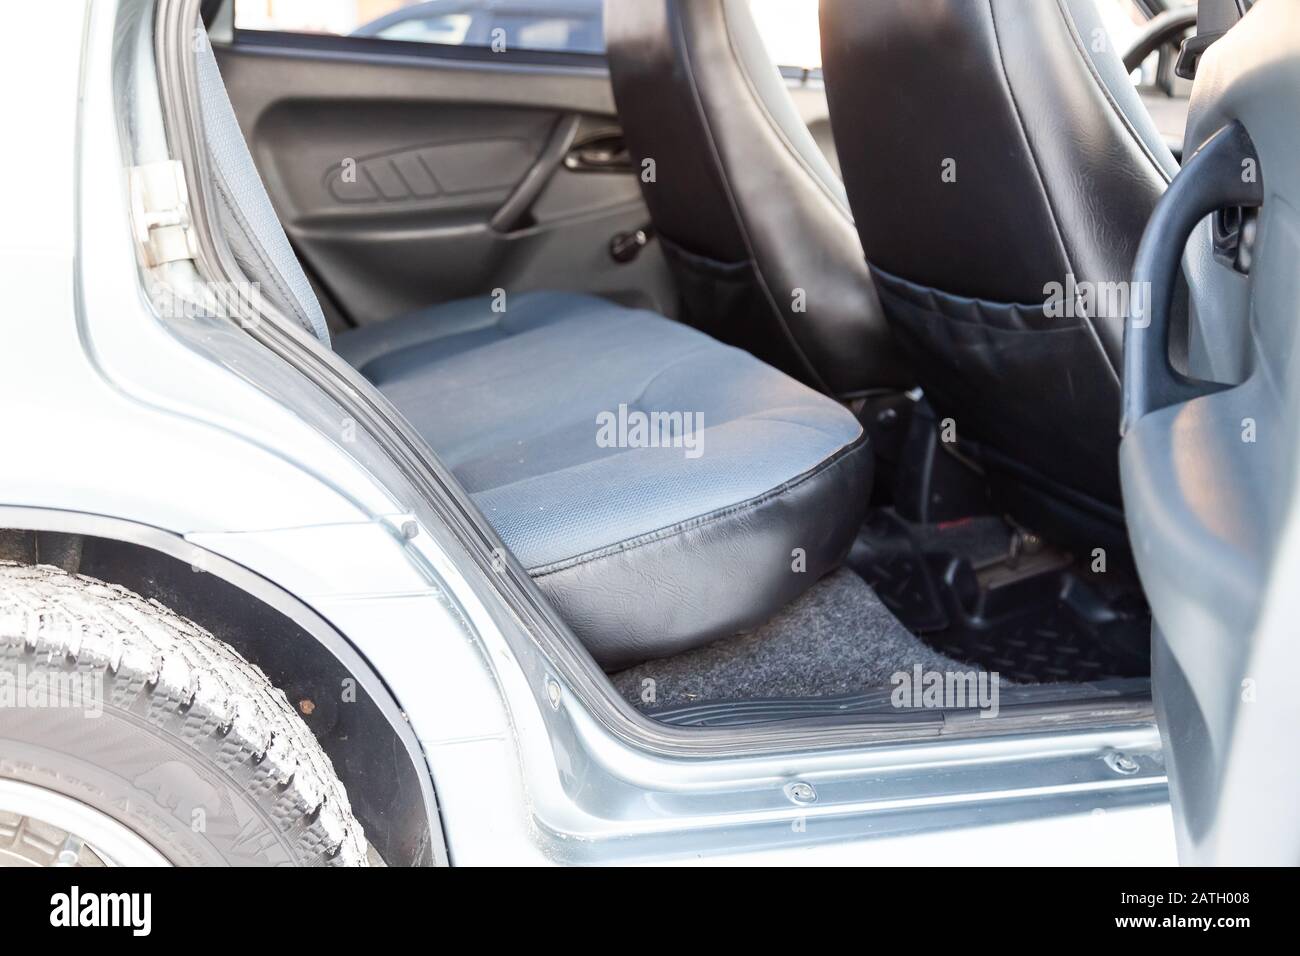 Novosibirsk, Russia - 02.01.2020: The interior of the car lada 2114 samara with a view of therear seats with light gray trim. Auto service industry. Stock Photo